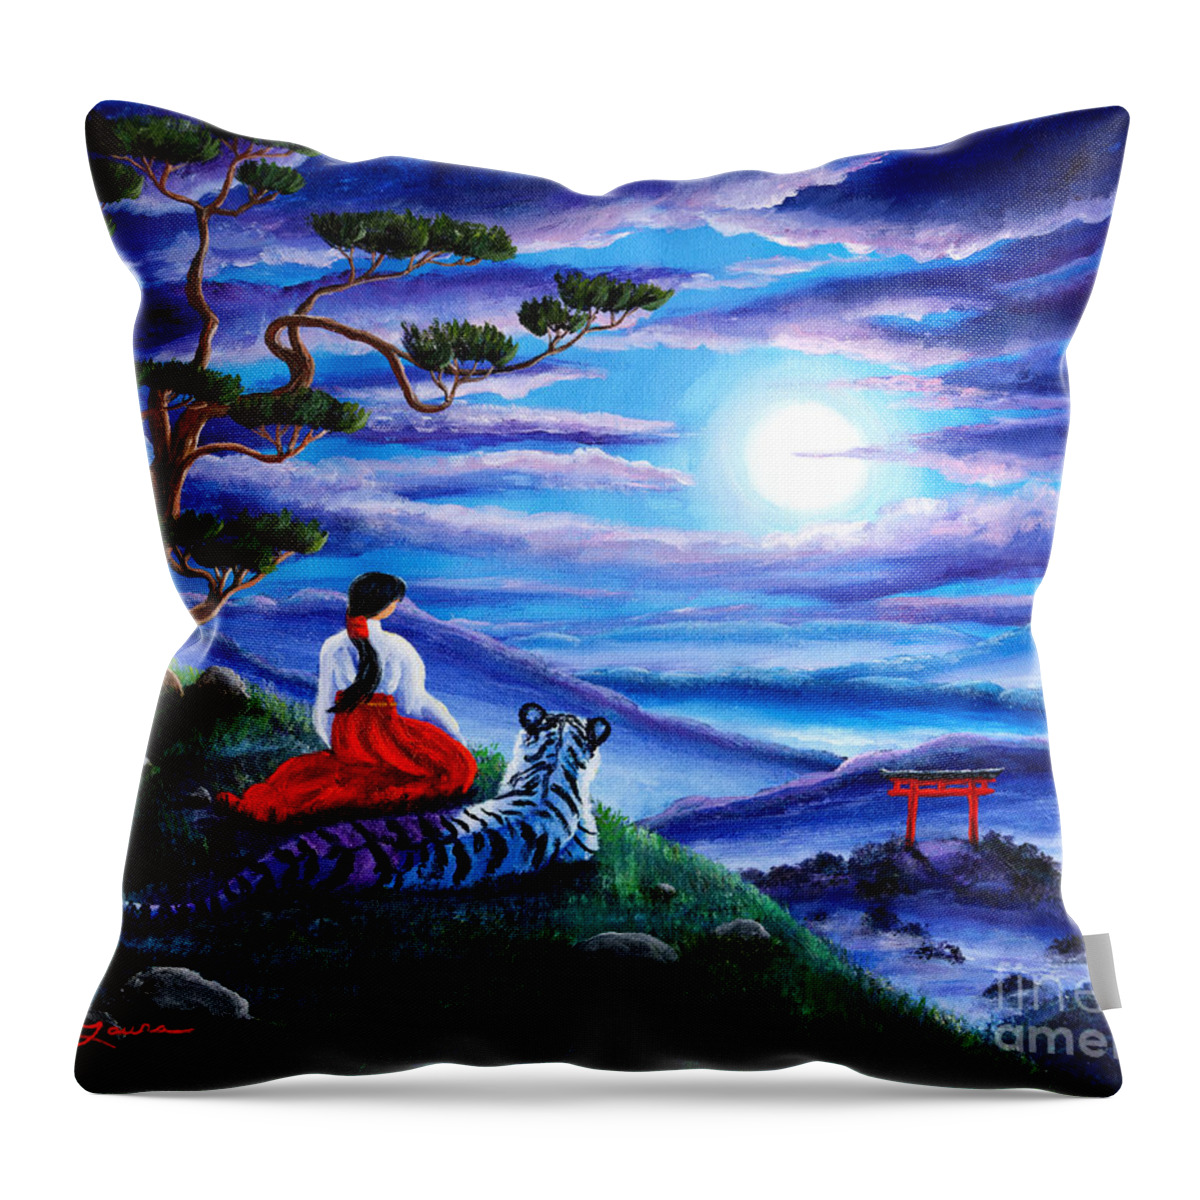 Japanese Throw Pillow featuring the painting White Tiger Meditation by Laura Iverson